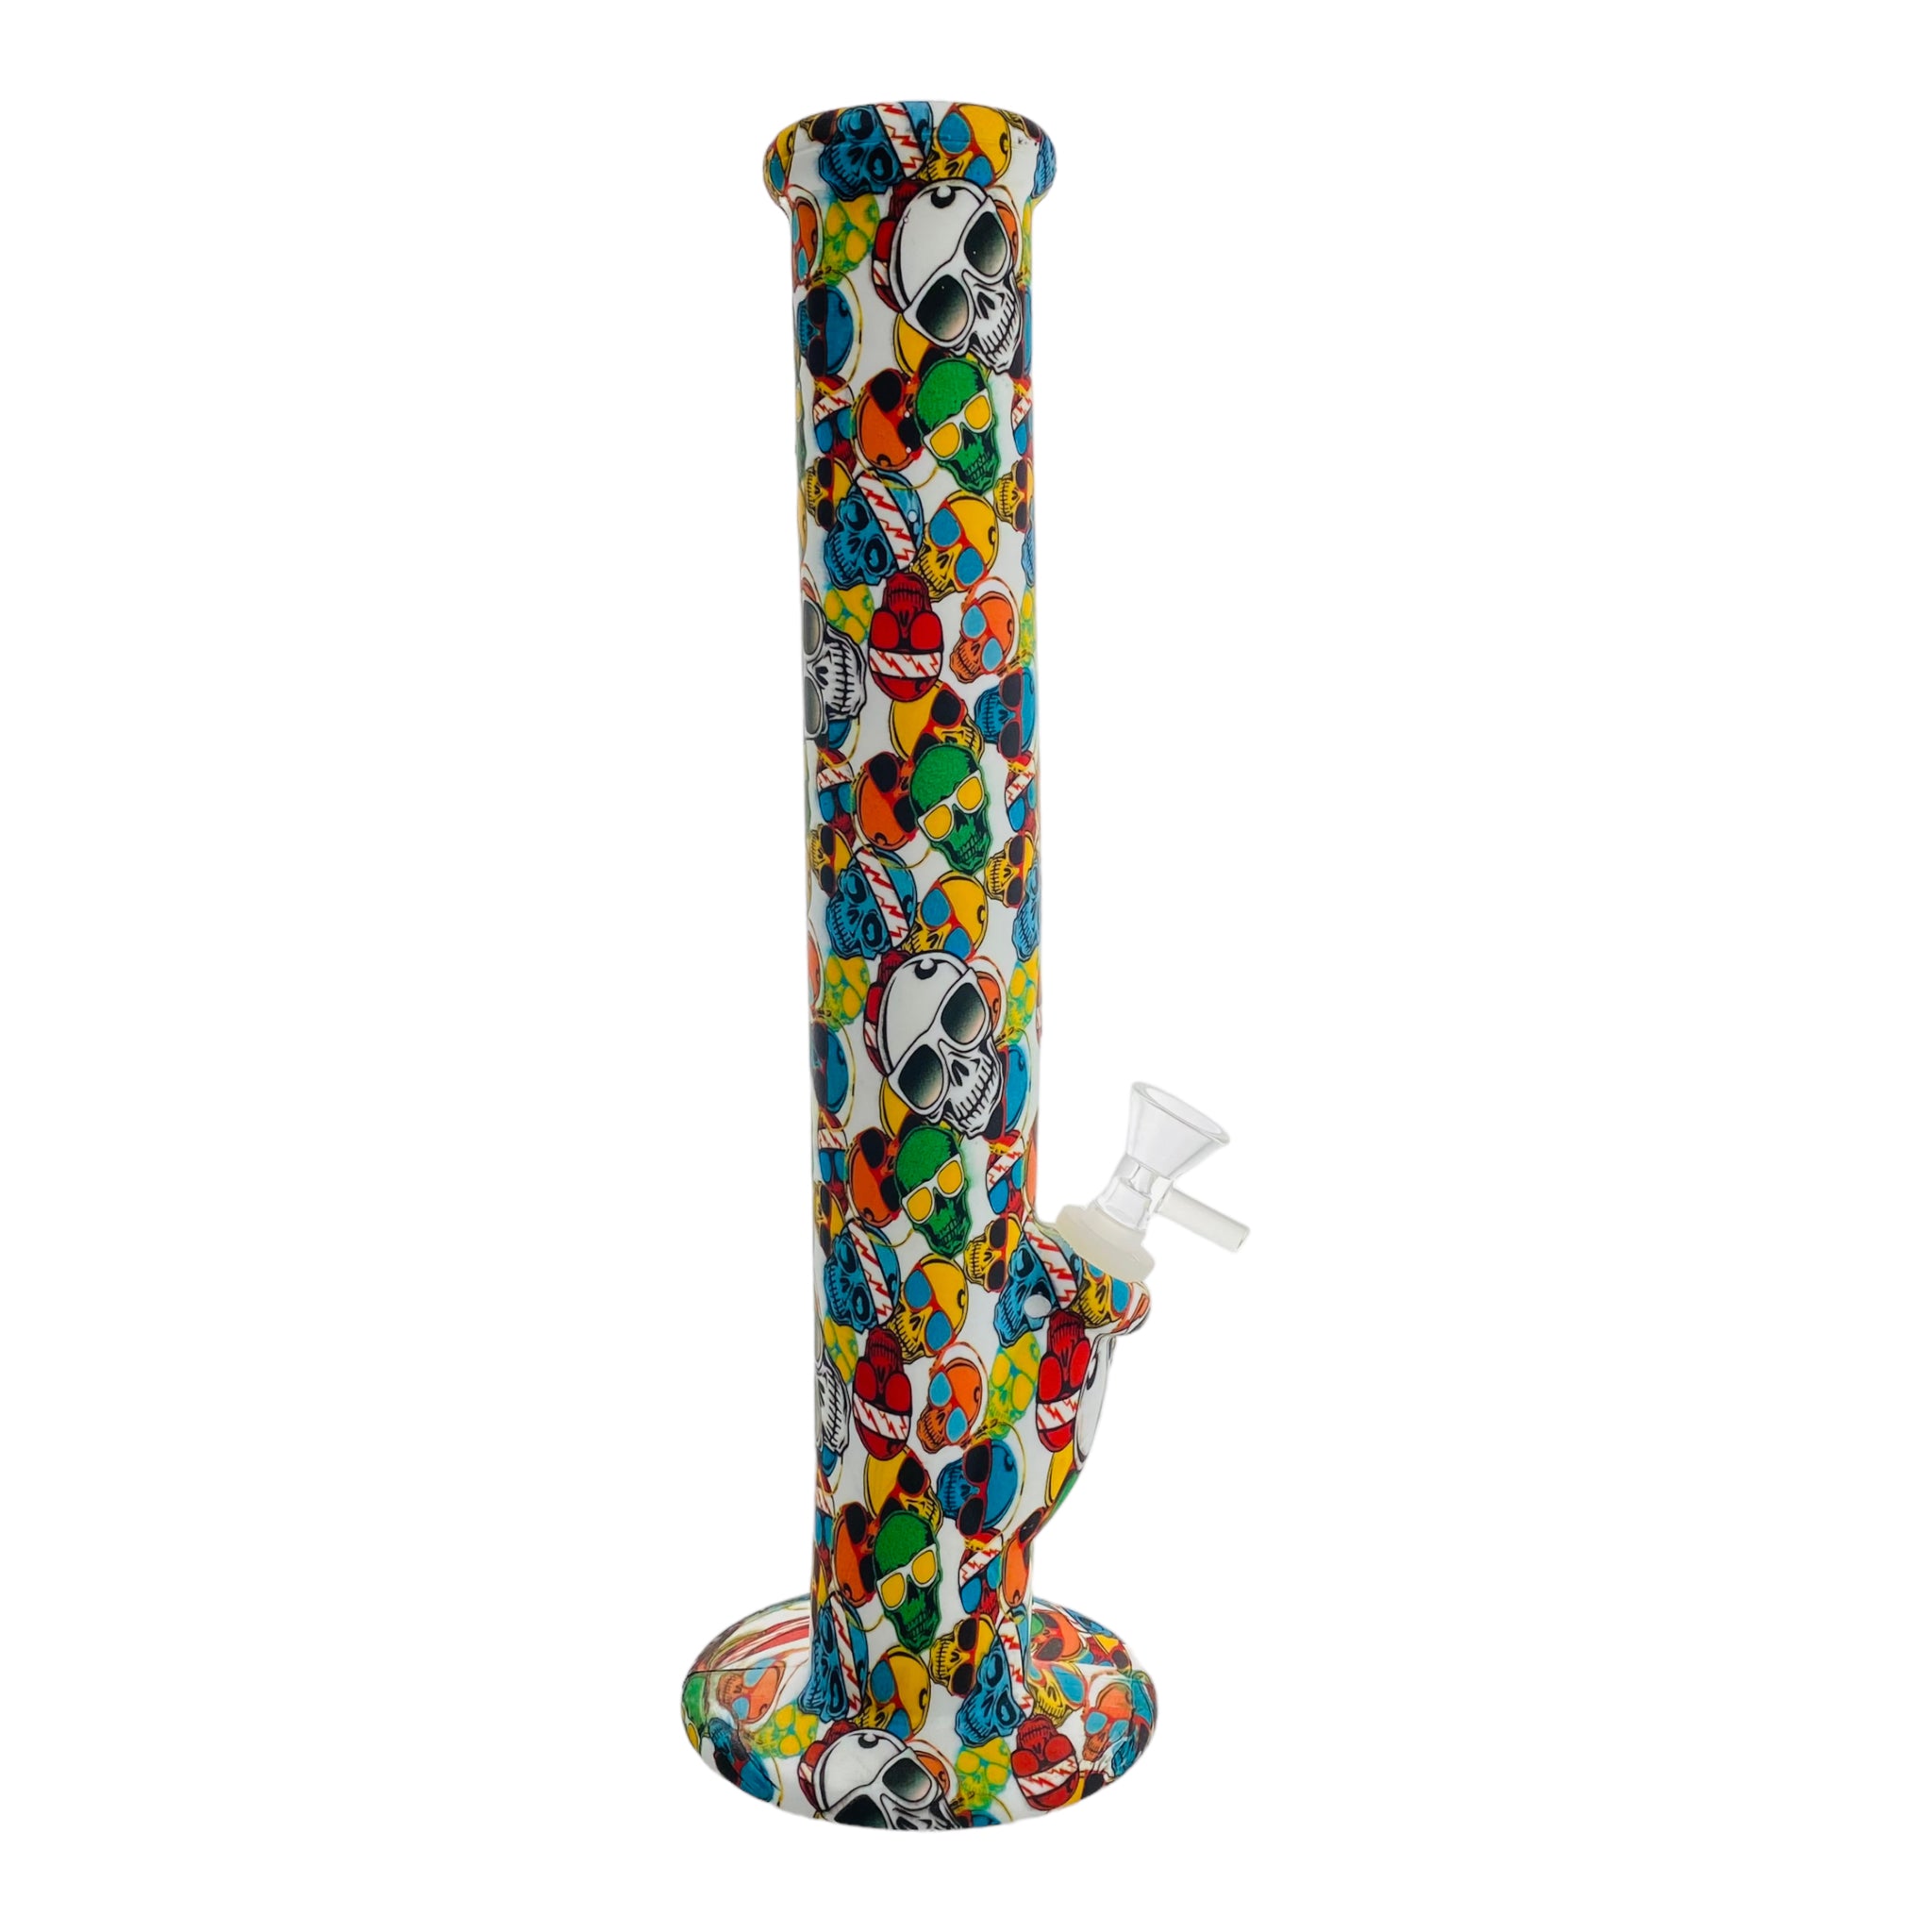 12 Inch Silicone Straight Bong With Colorful Skulls With Sunglasses